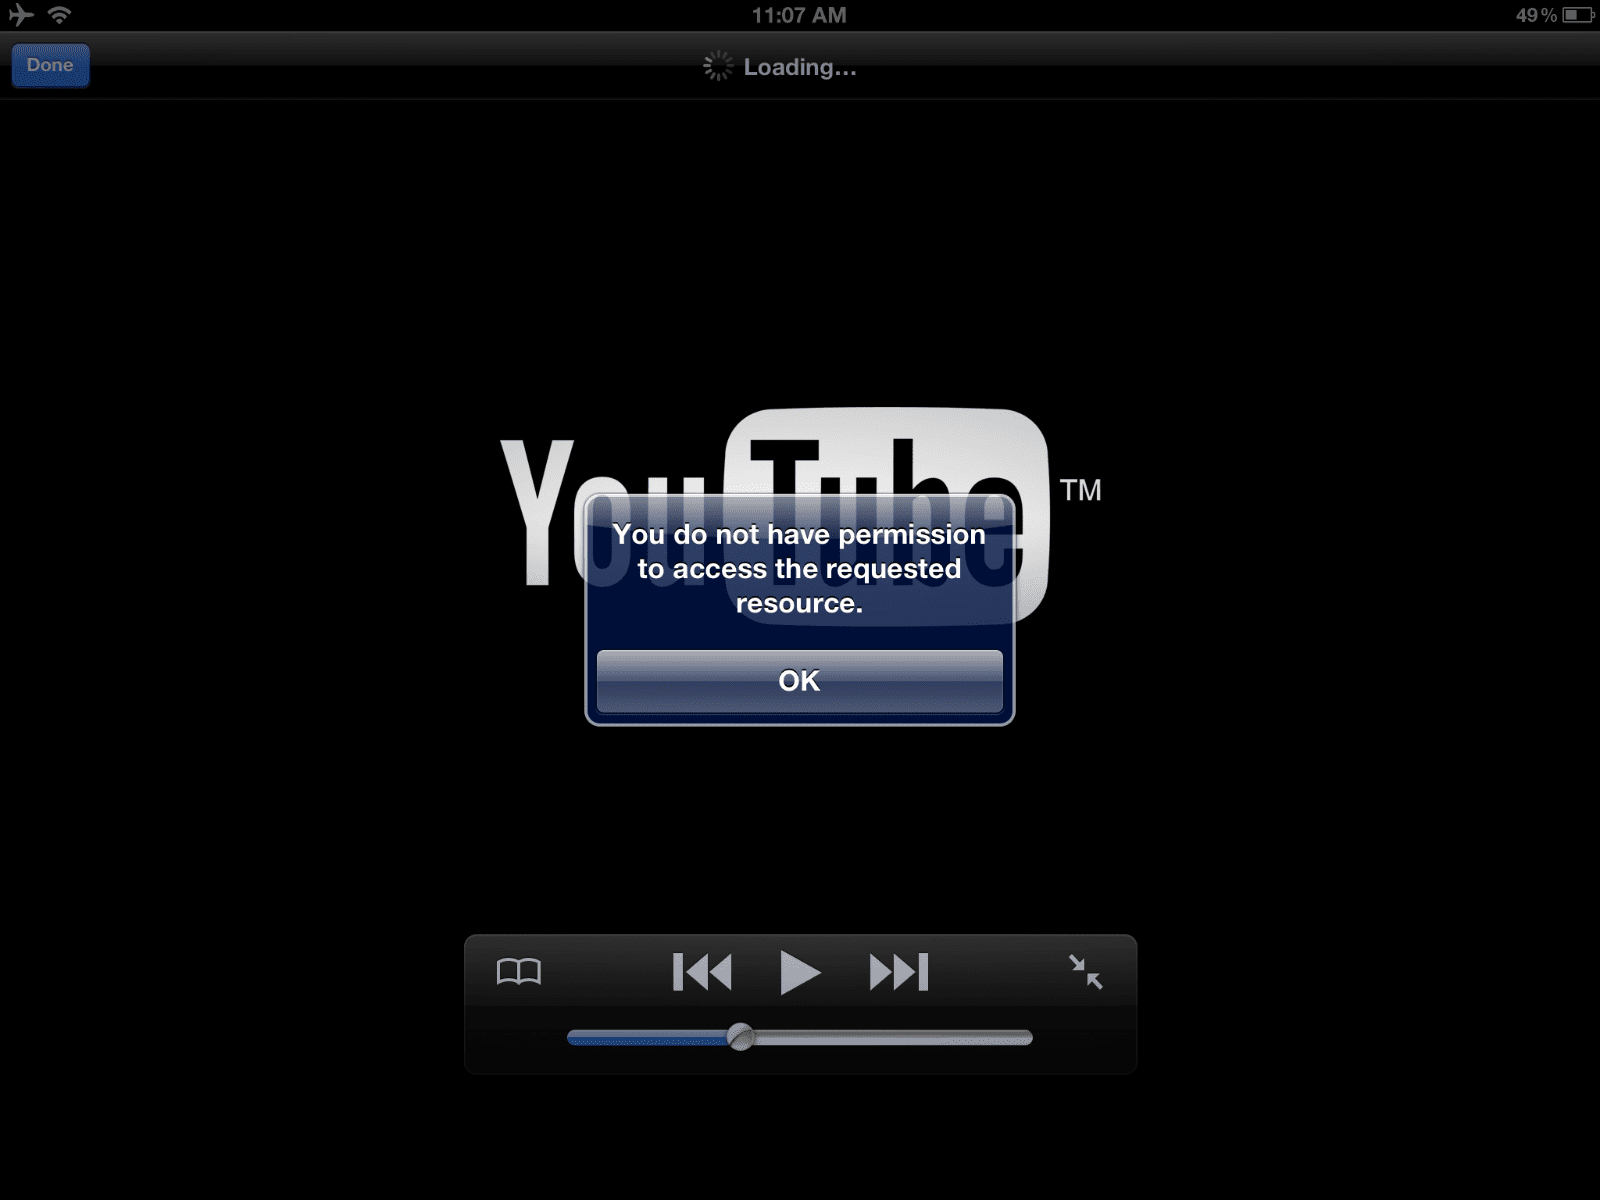 iPad, iPhone, iPod YouTube app: You do not have permission to access